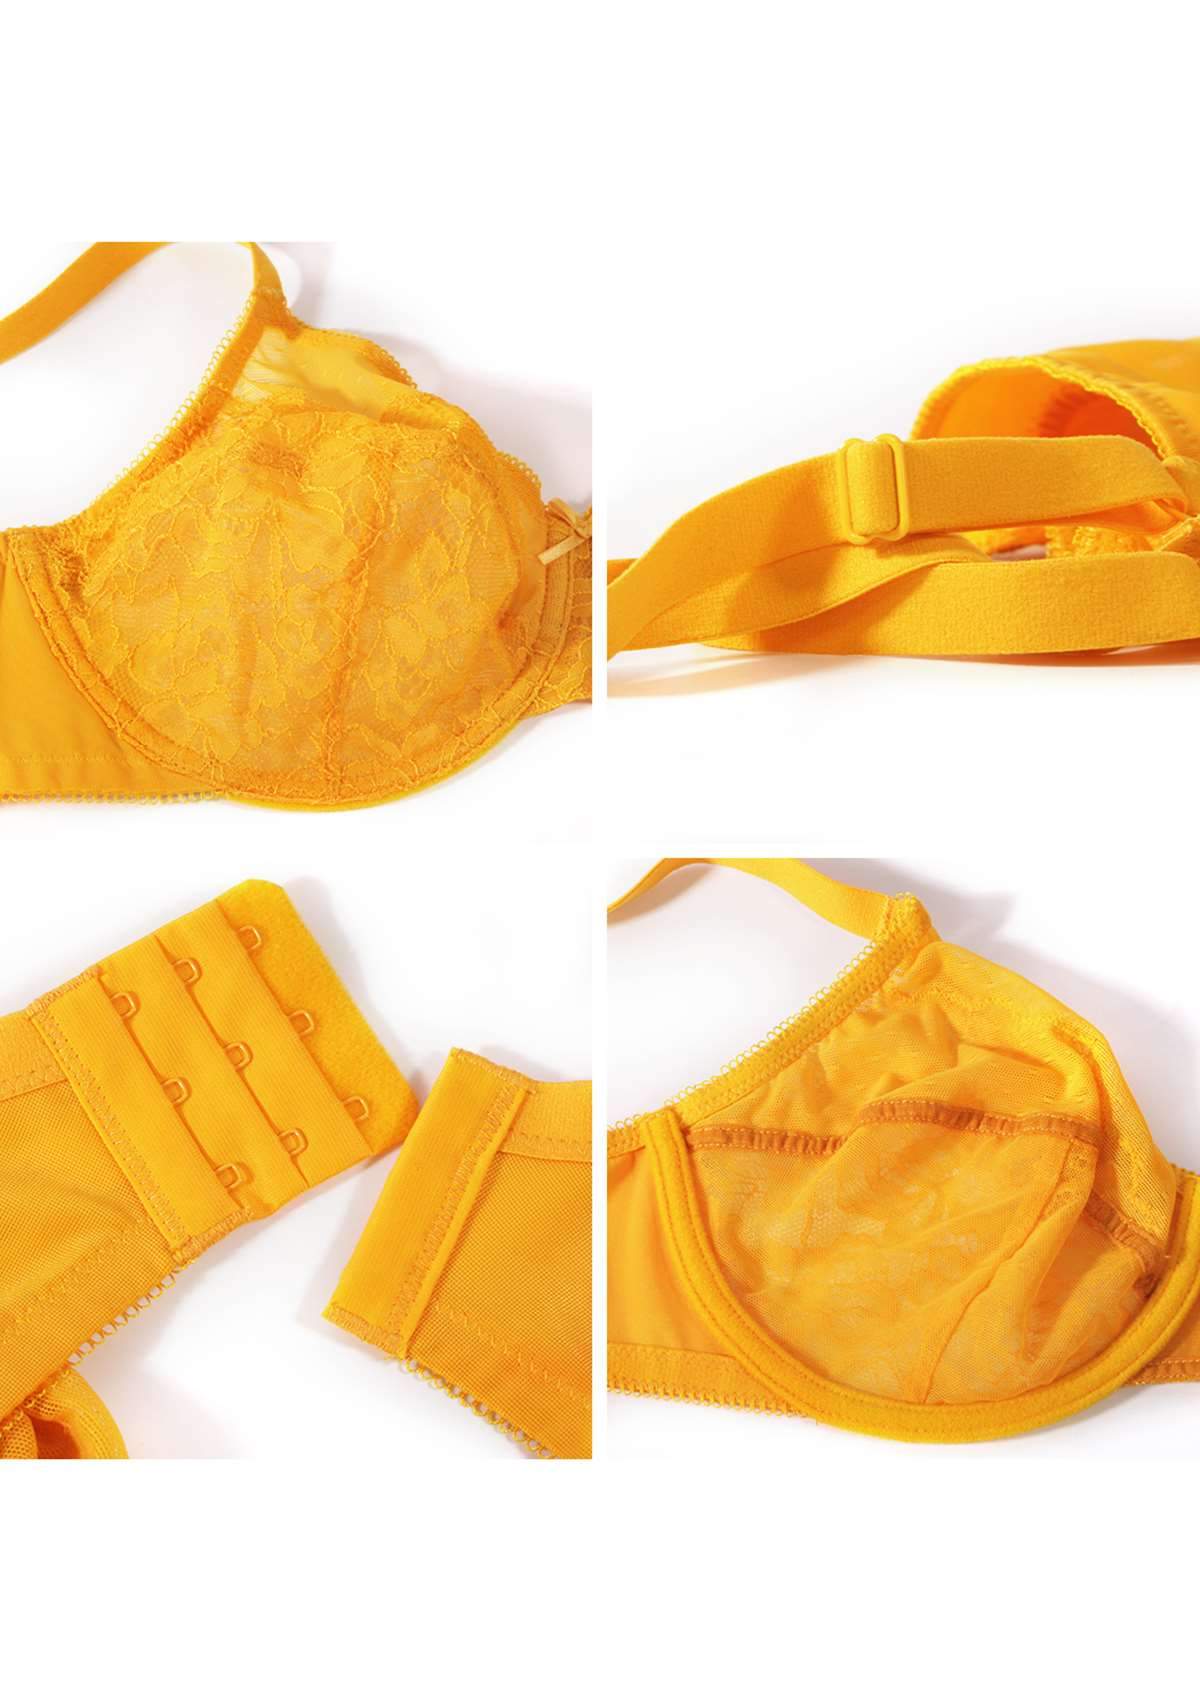 HSIA Enchante Bra And Panty Sets: Unpadded Bra With Back Support - Cadmium Yellow / 44 / G